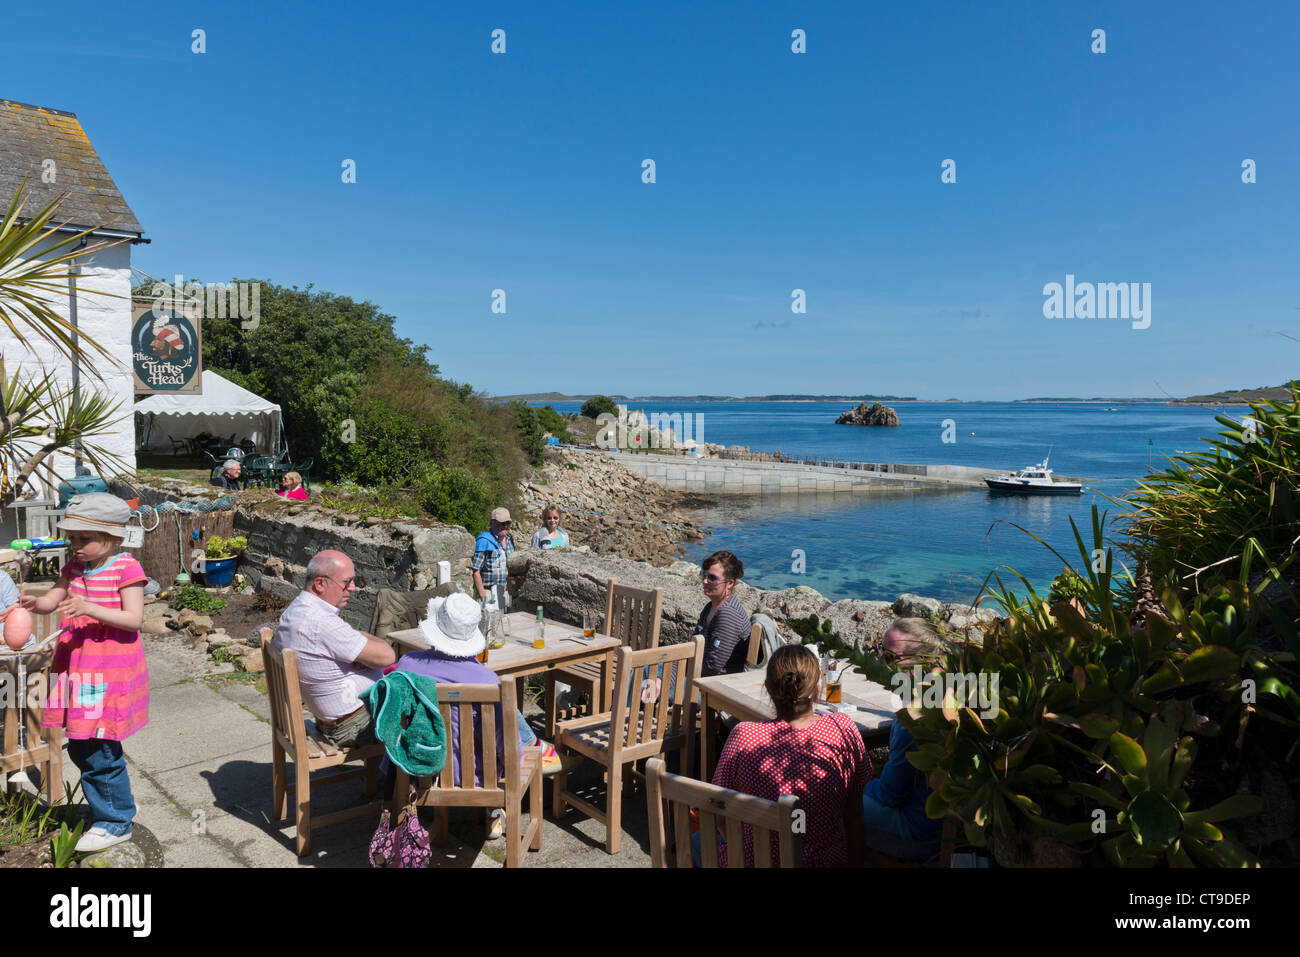 The Turks Head Pub in a picturesque coastal setting on St Agnes. The isles of Scilly. Stock Photo